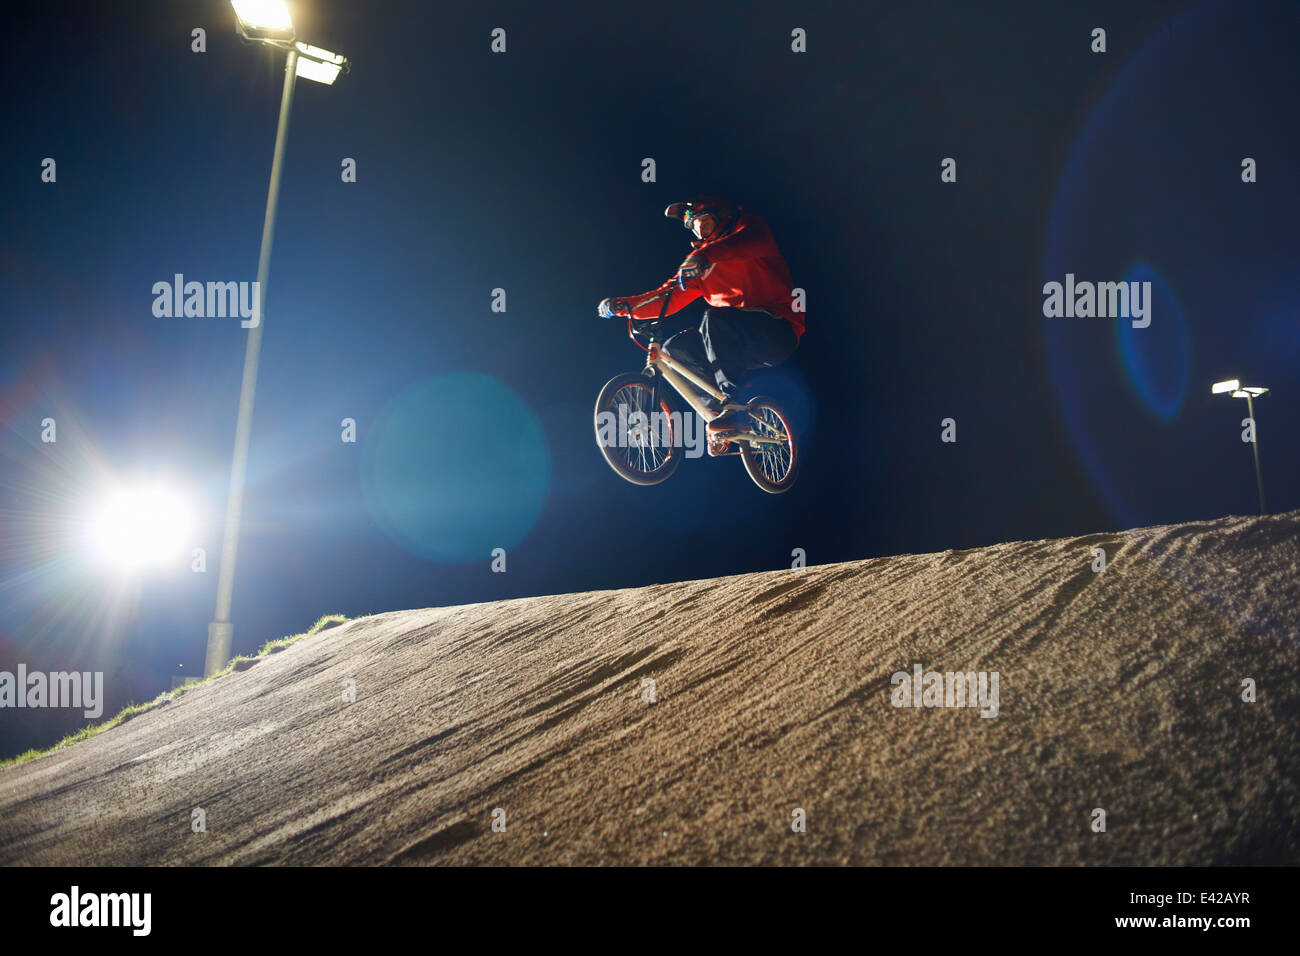 BMX-cyclist jumps his bike at night time Stock Photo